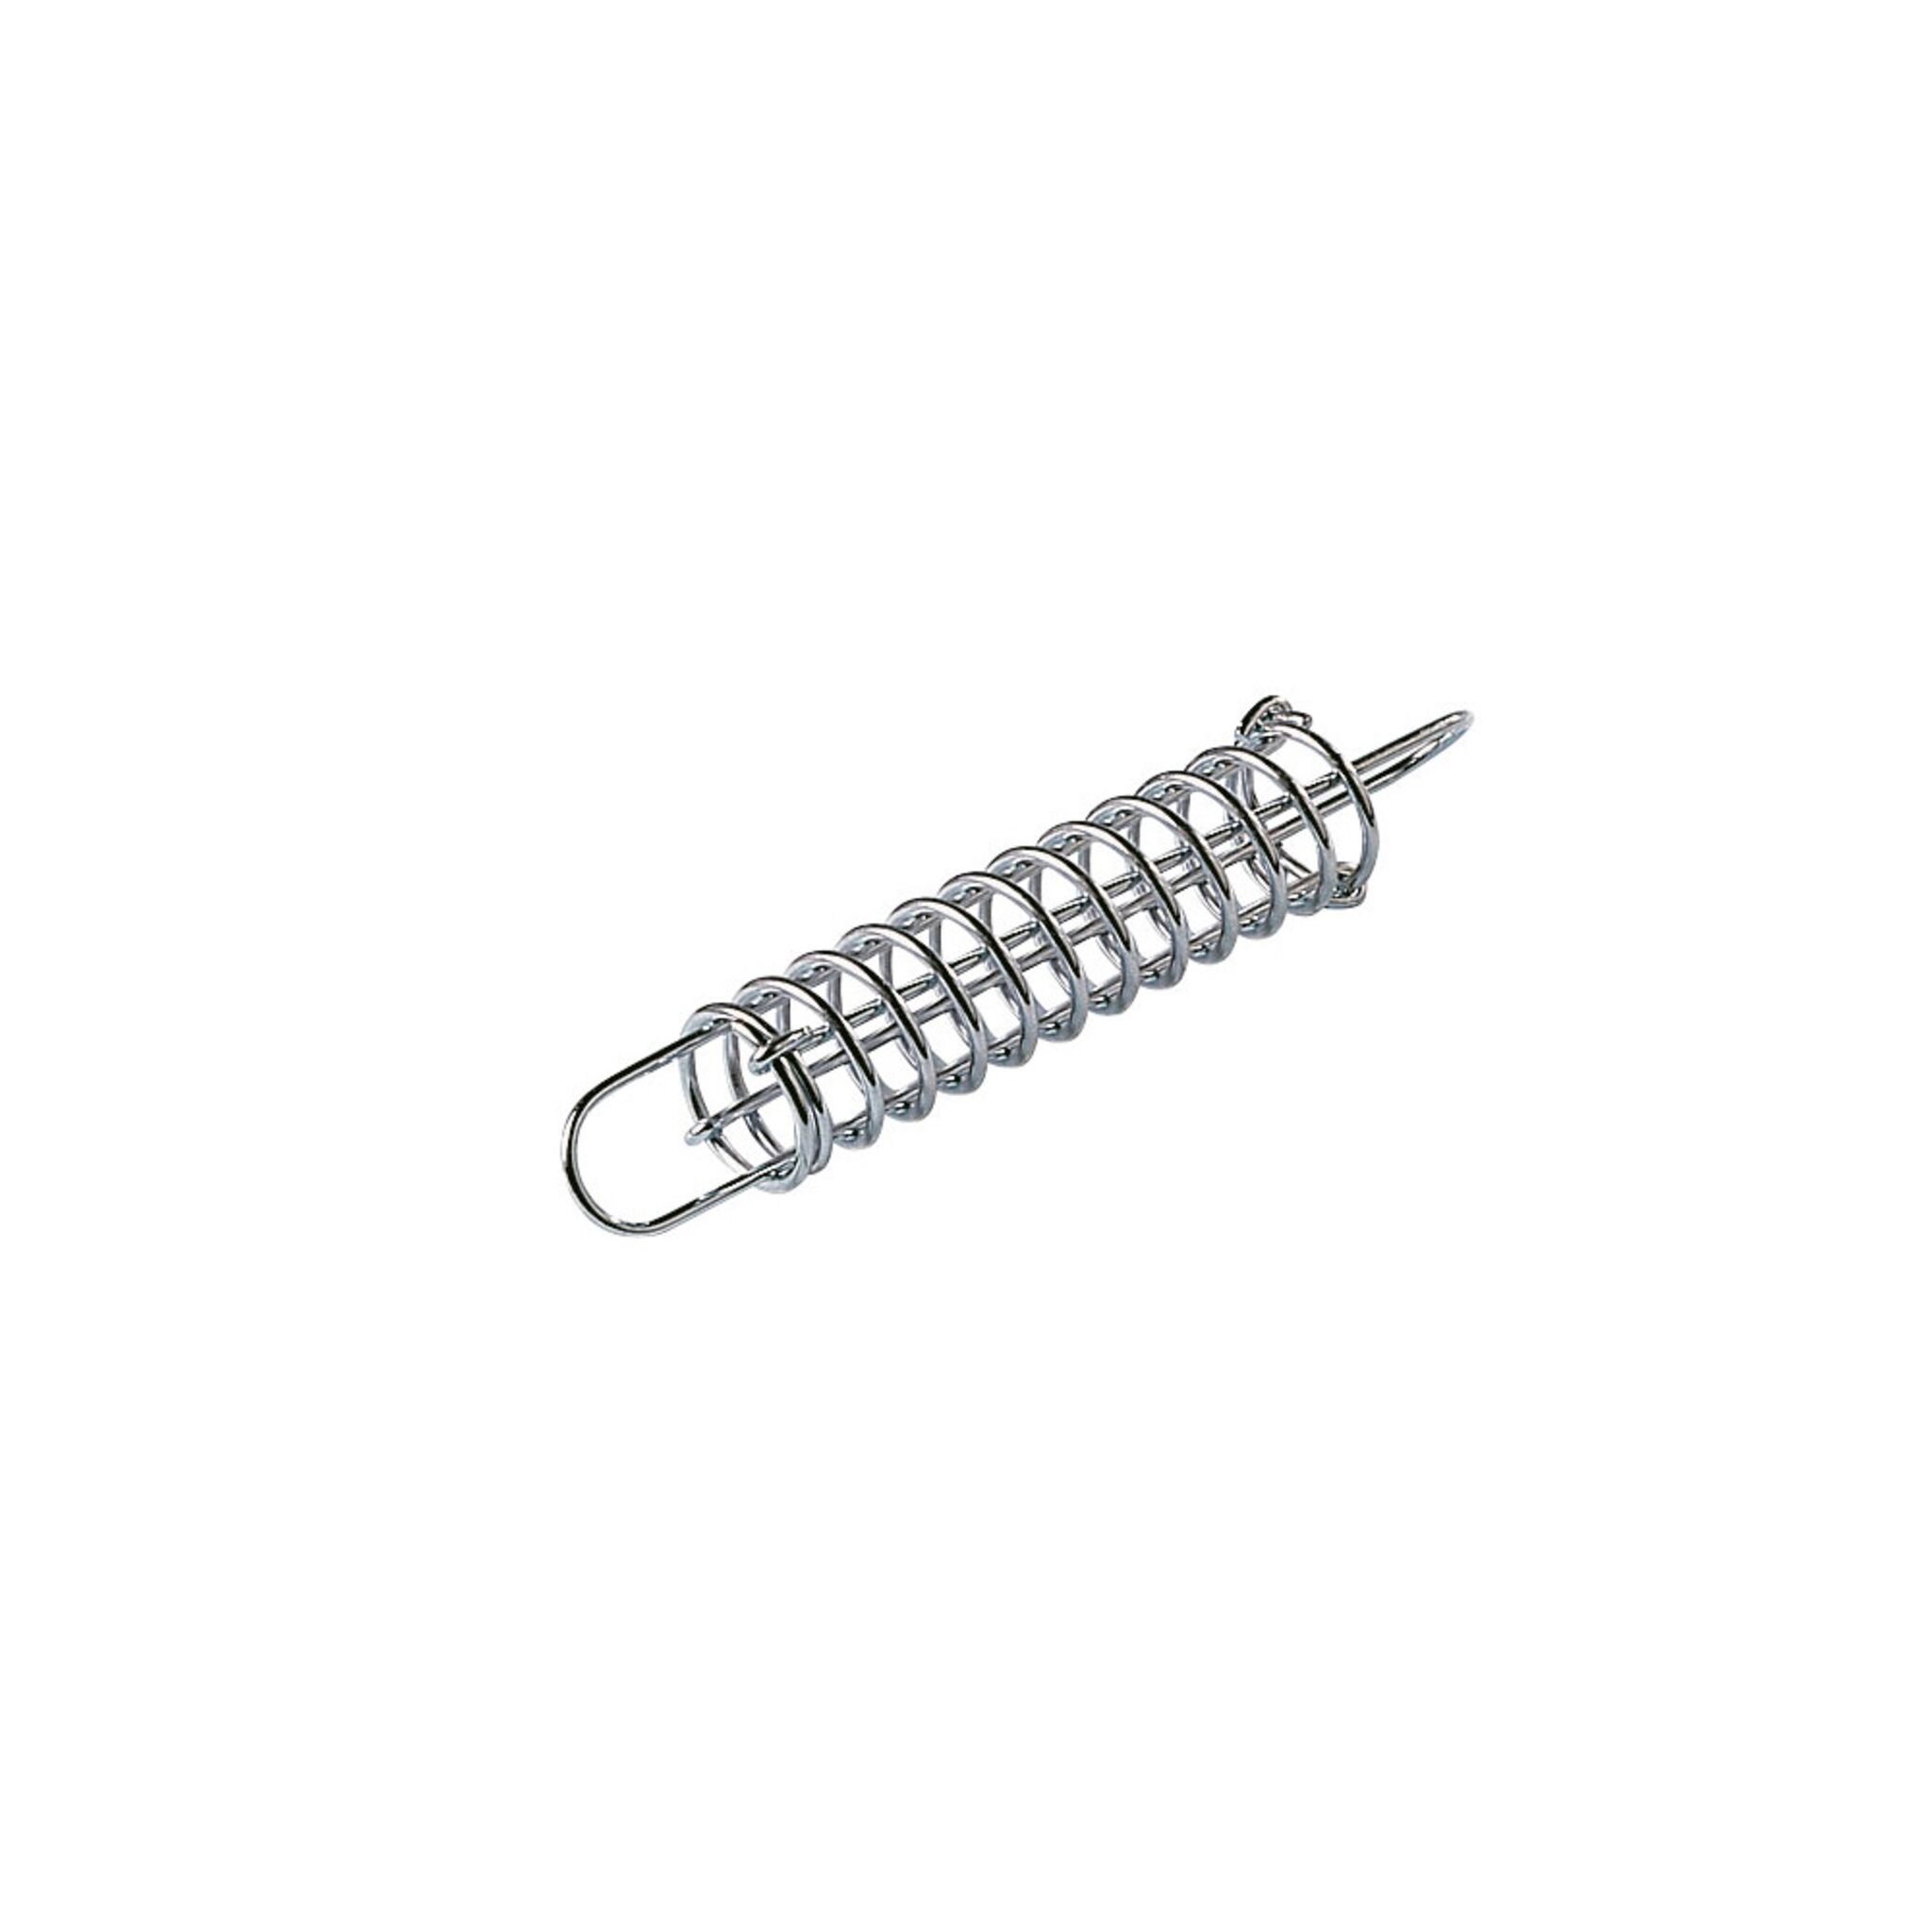 Stainless steel contact spring 6 mm